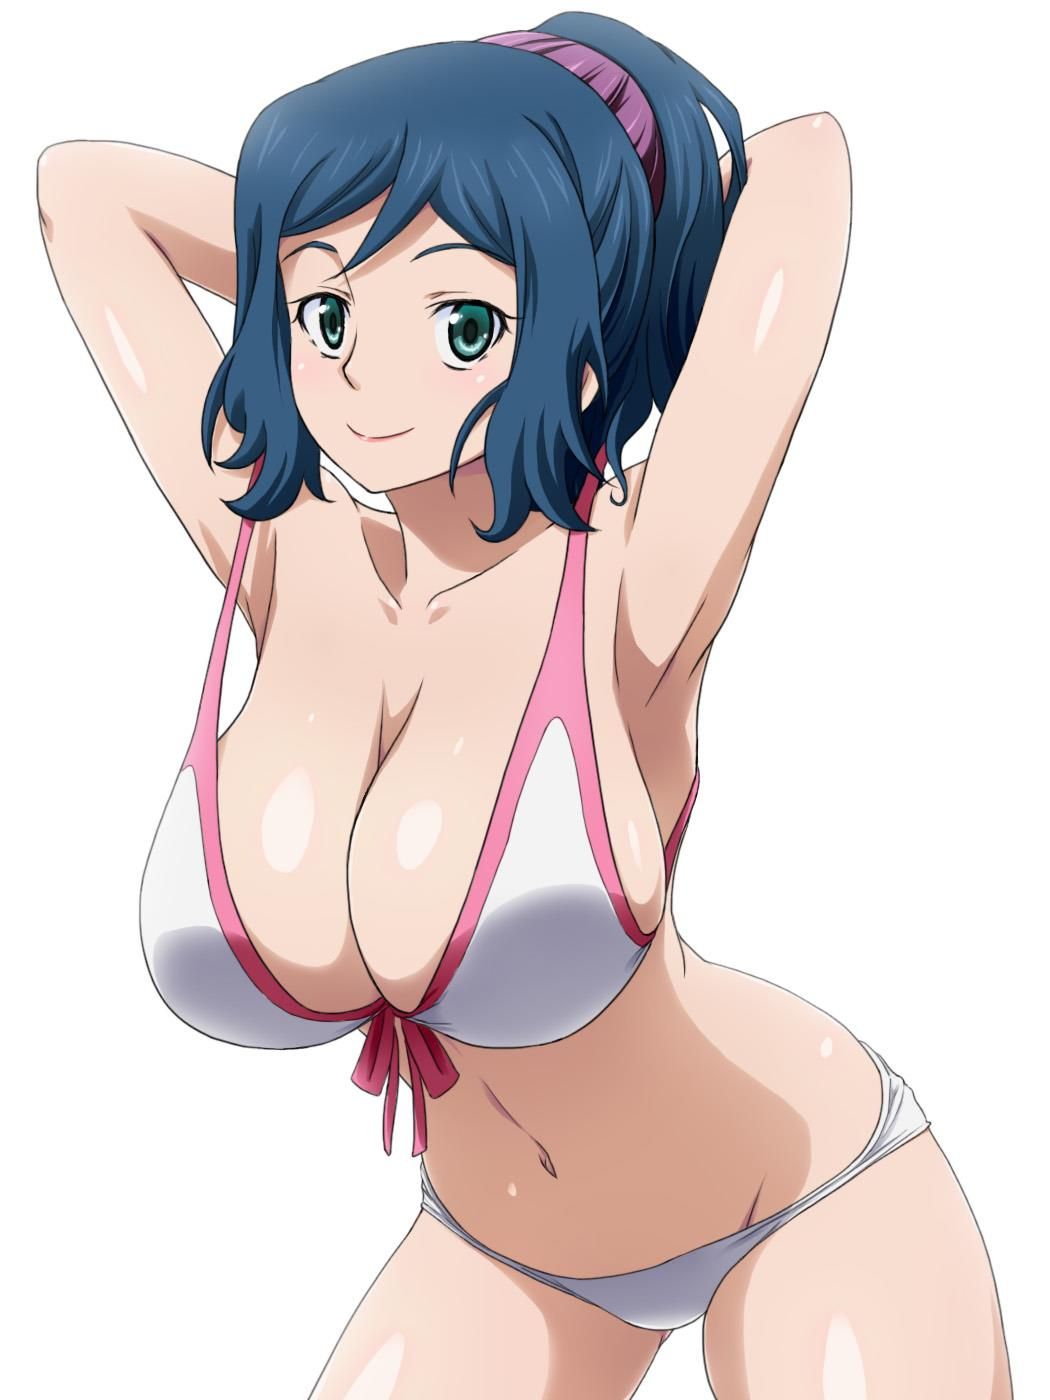 In Gundam build fighters really want to nukinuki 9